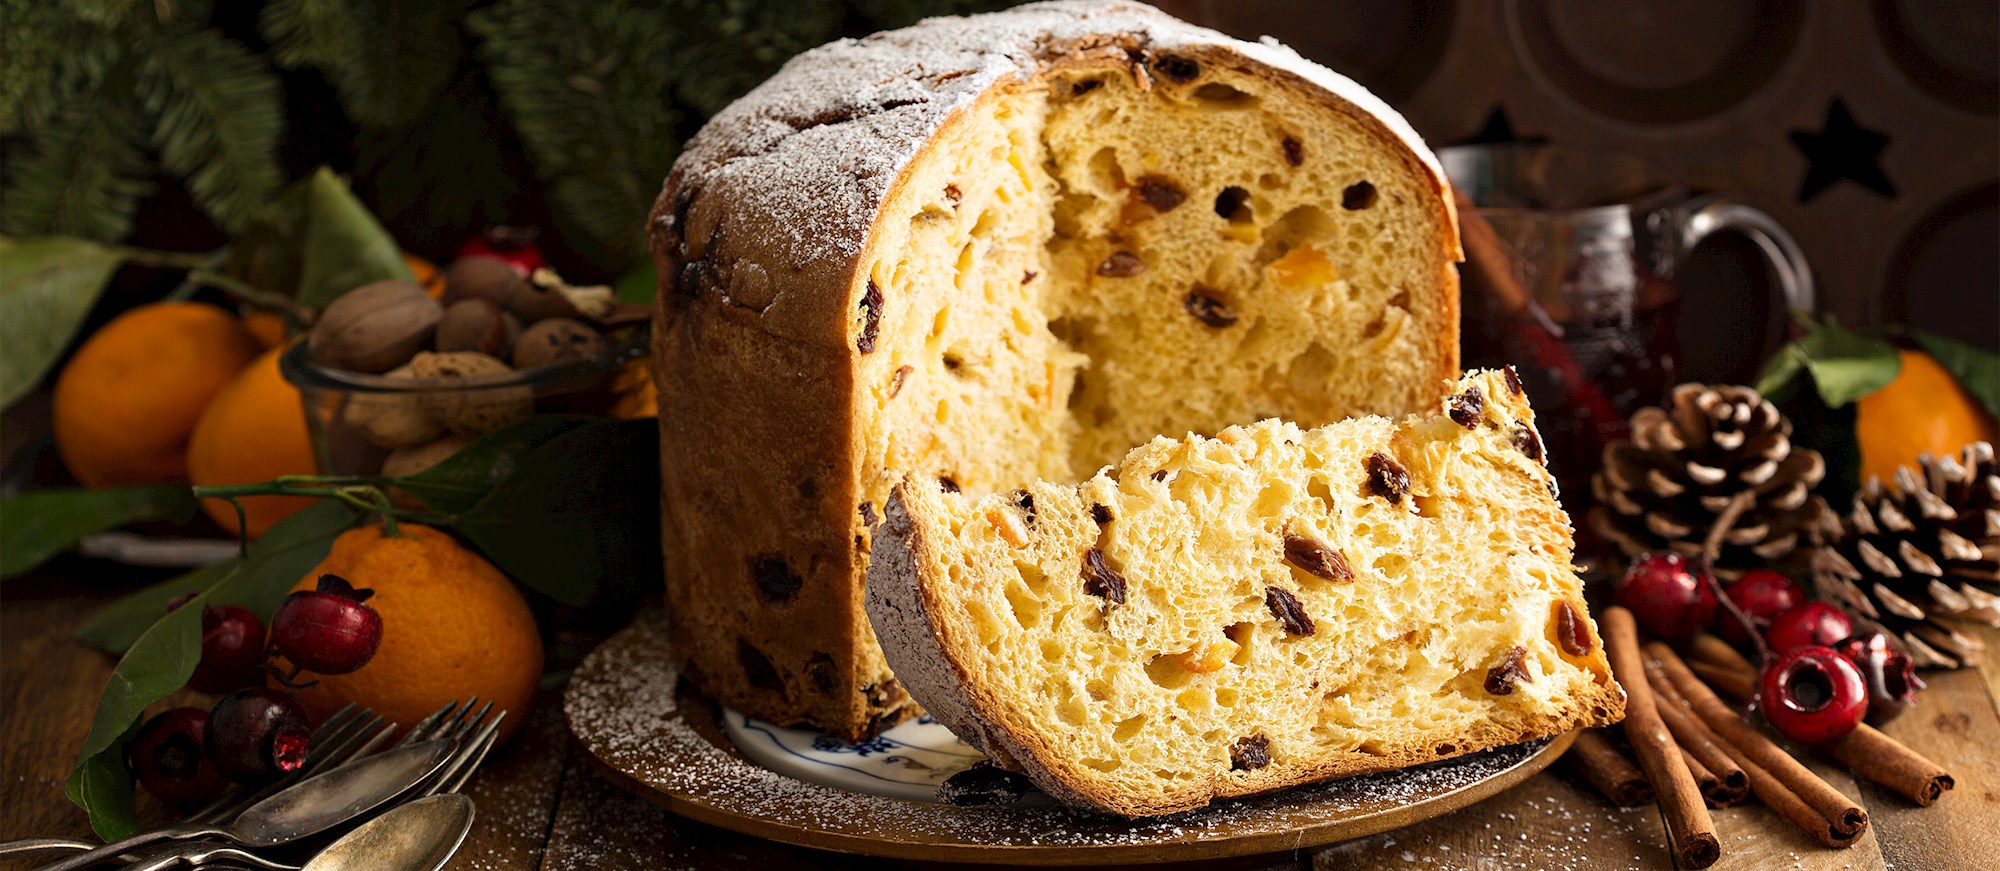 Where to Eat the Best Panettone in the World? | TasteAtlas